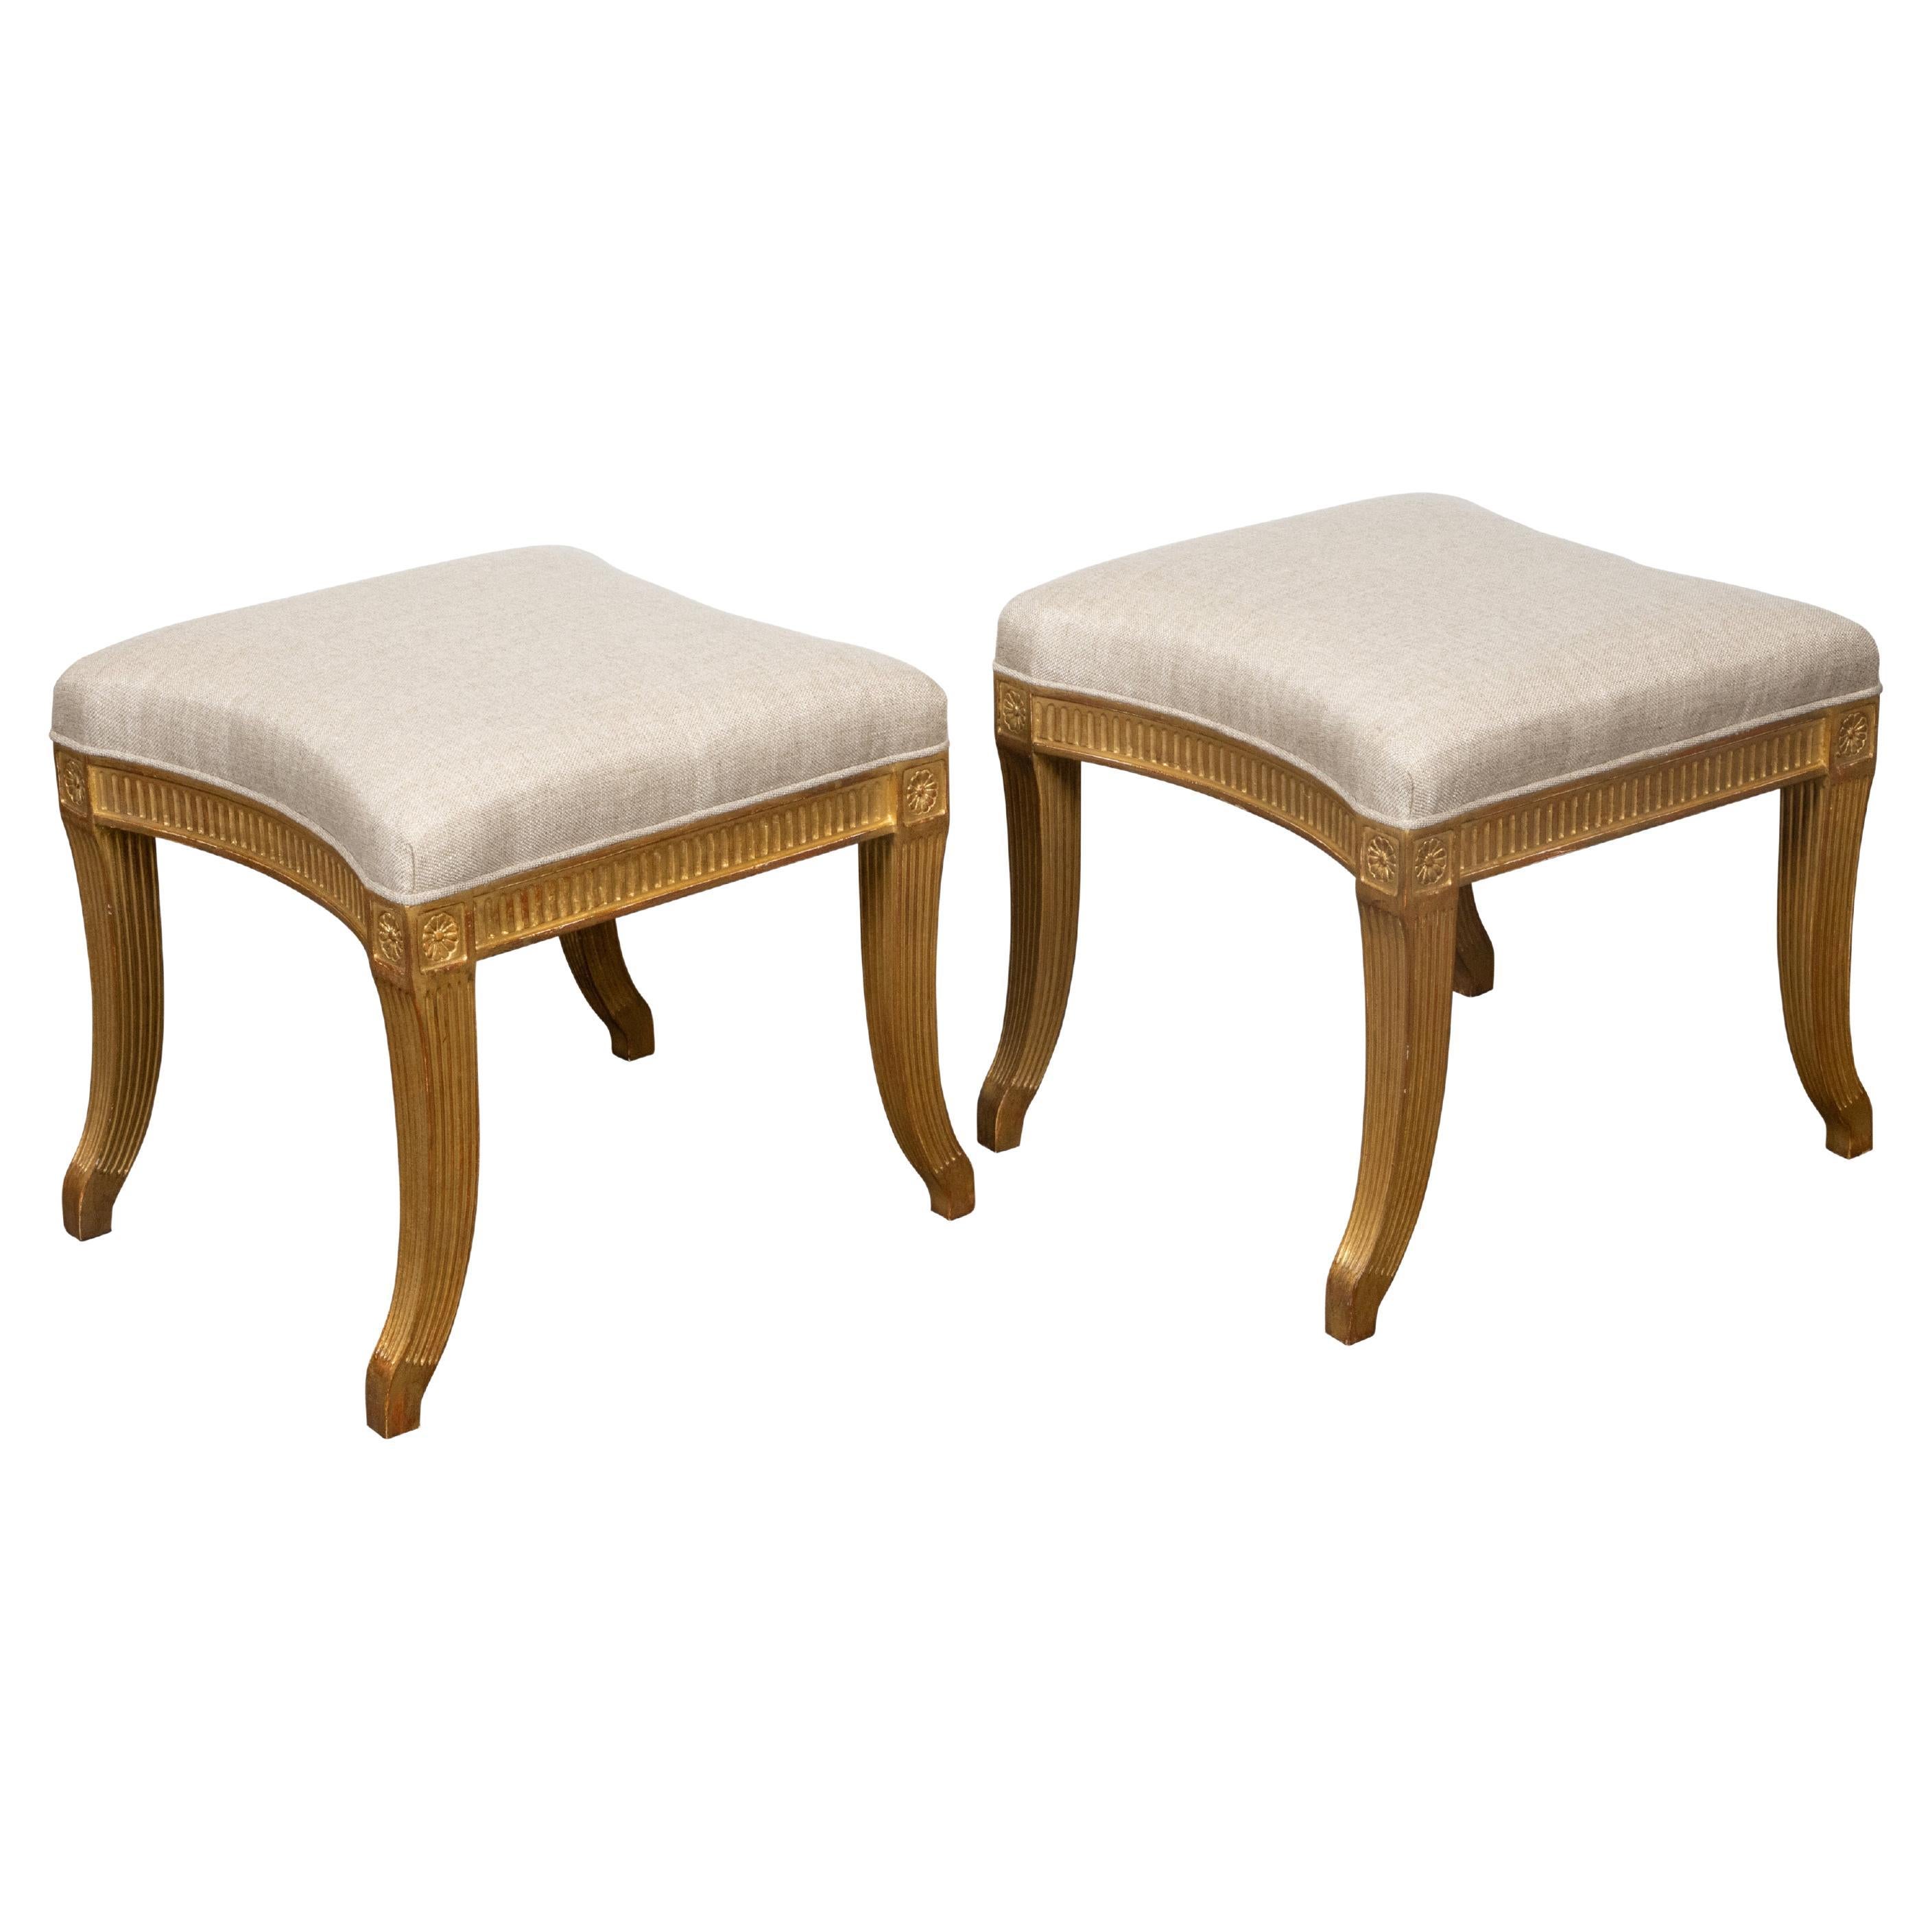 Pair of French Directoire Style Midcentury Giltwood Stools with New Upholstery For Sale